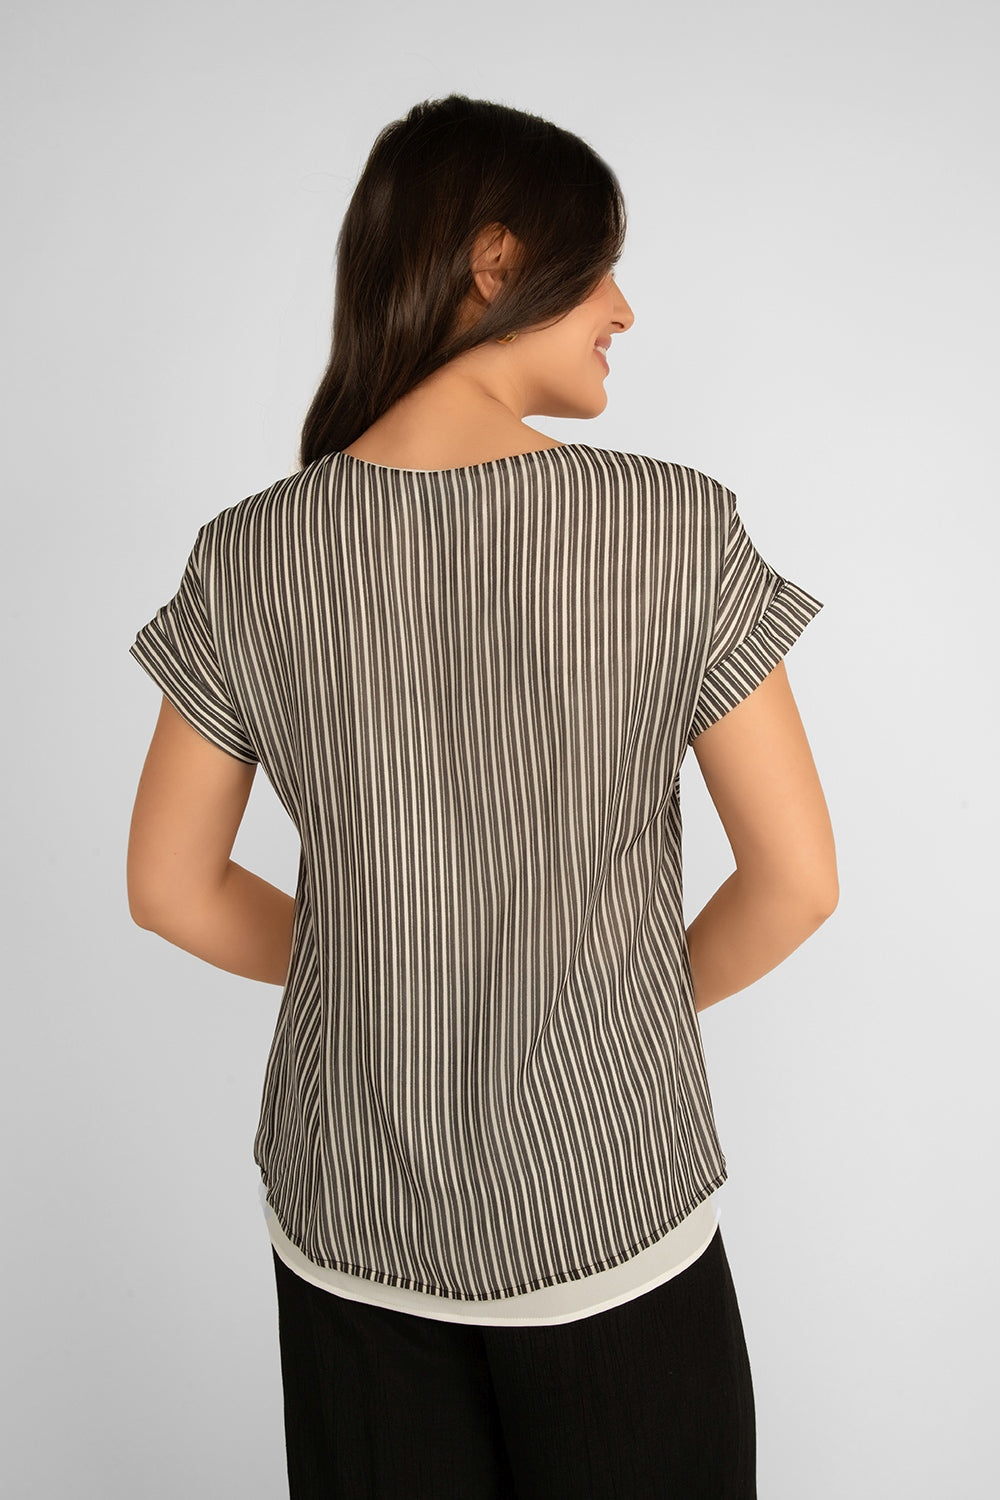 Back view of Picadilly (JS105FN) Women's Short Dolman Sleeve Striped Georgette Layered Blouse in a Black & White Patchwork Striped Print and white under layer